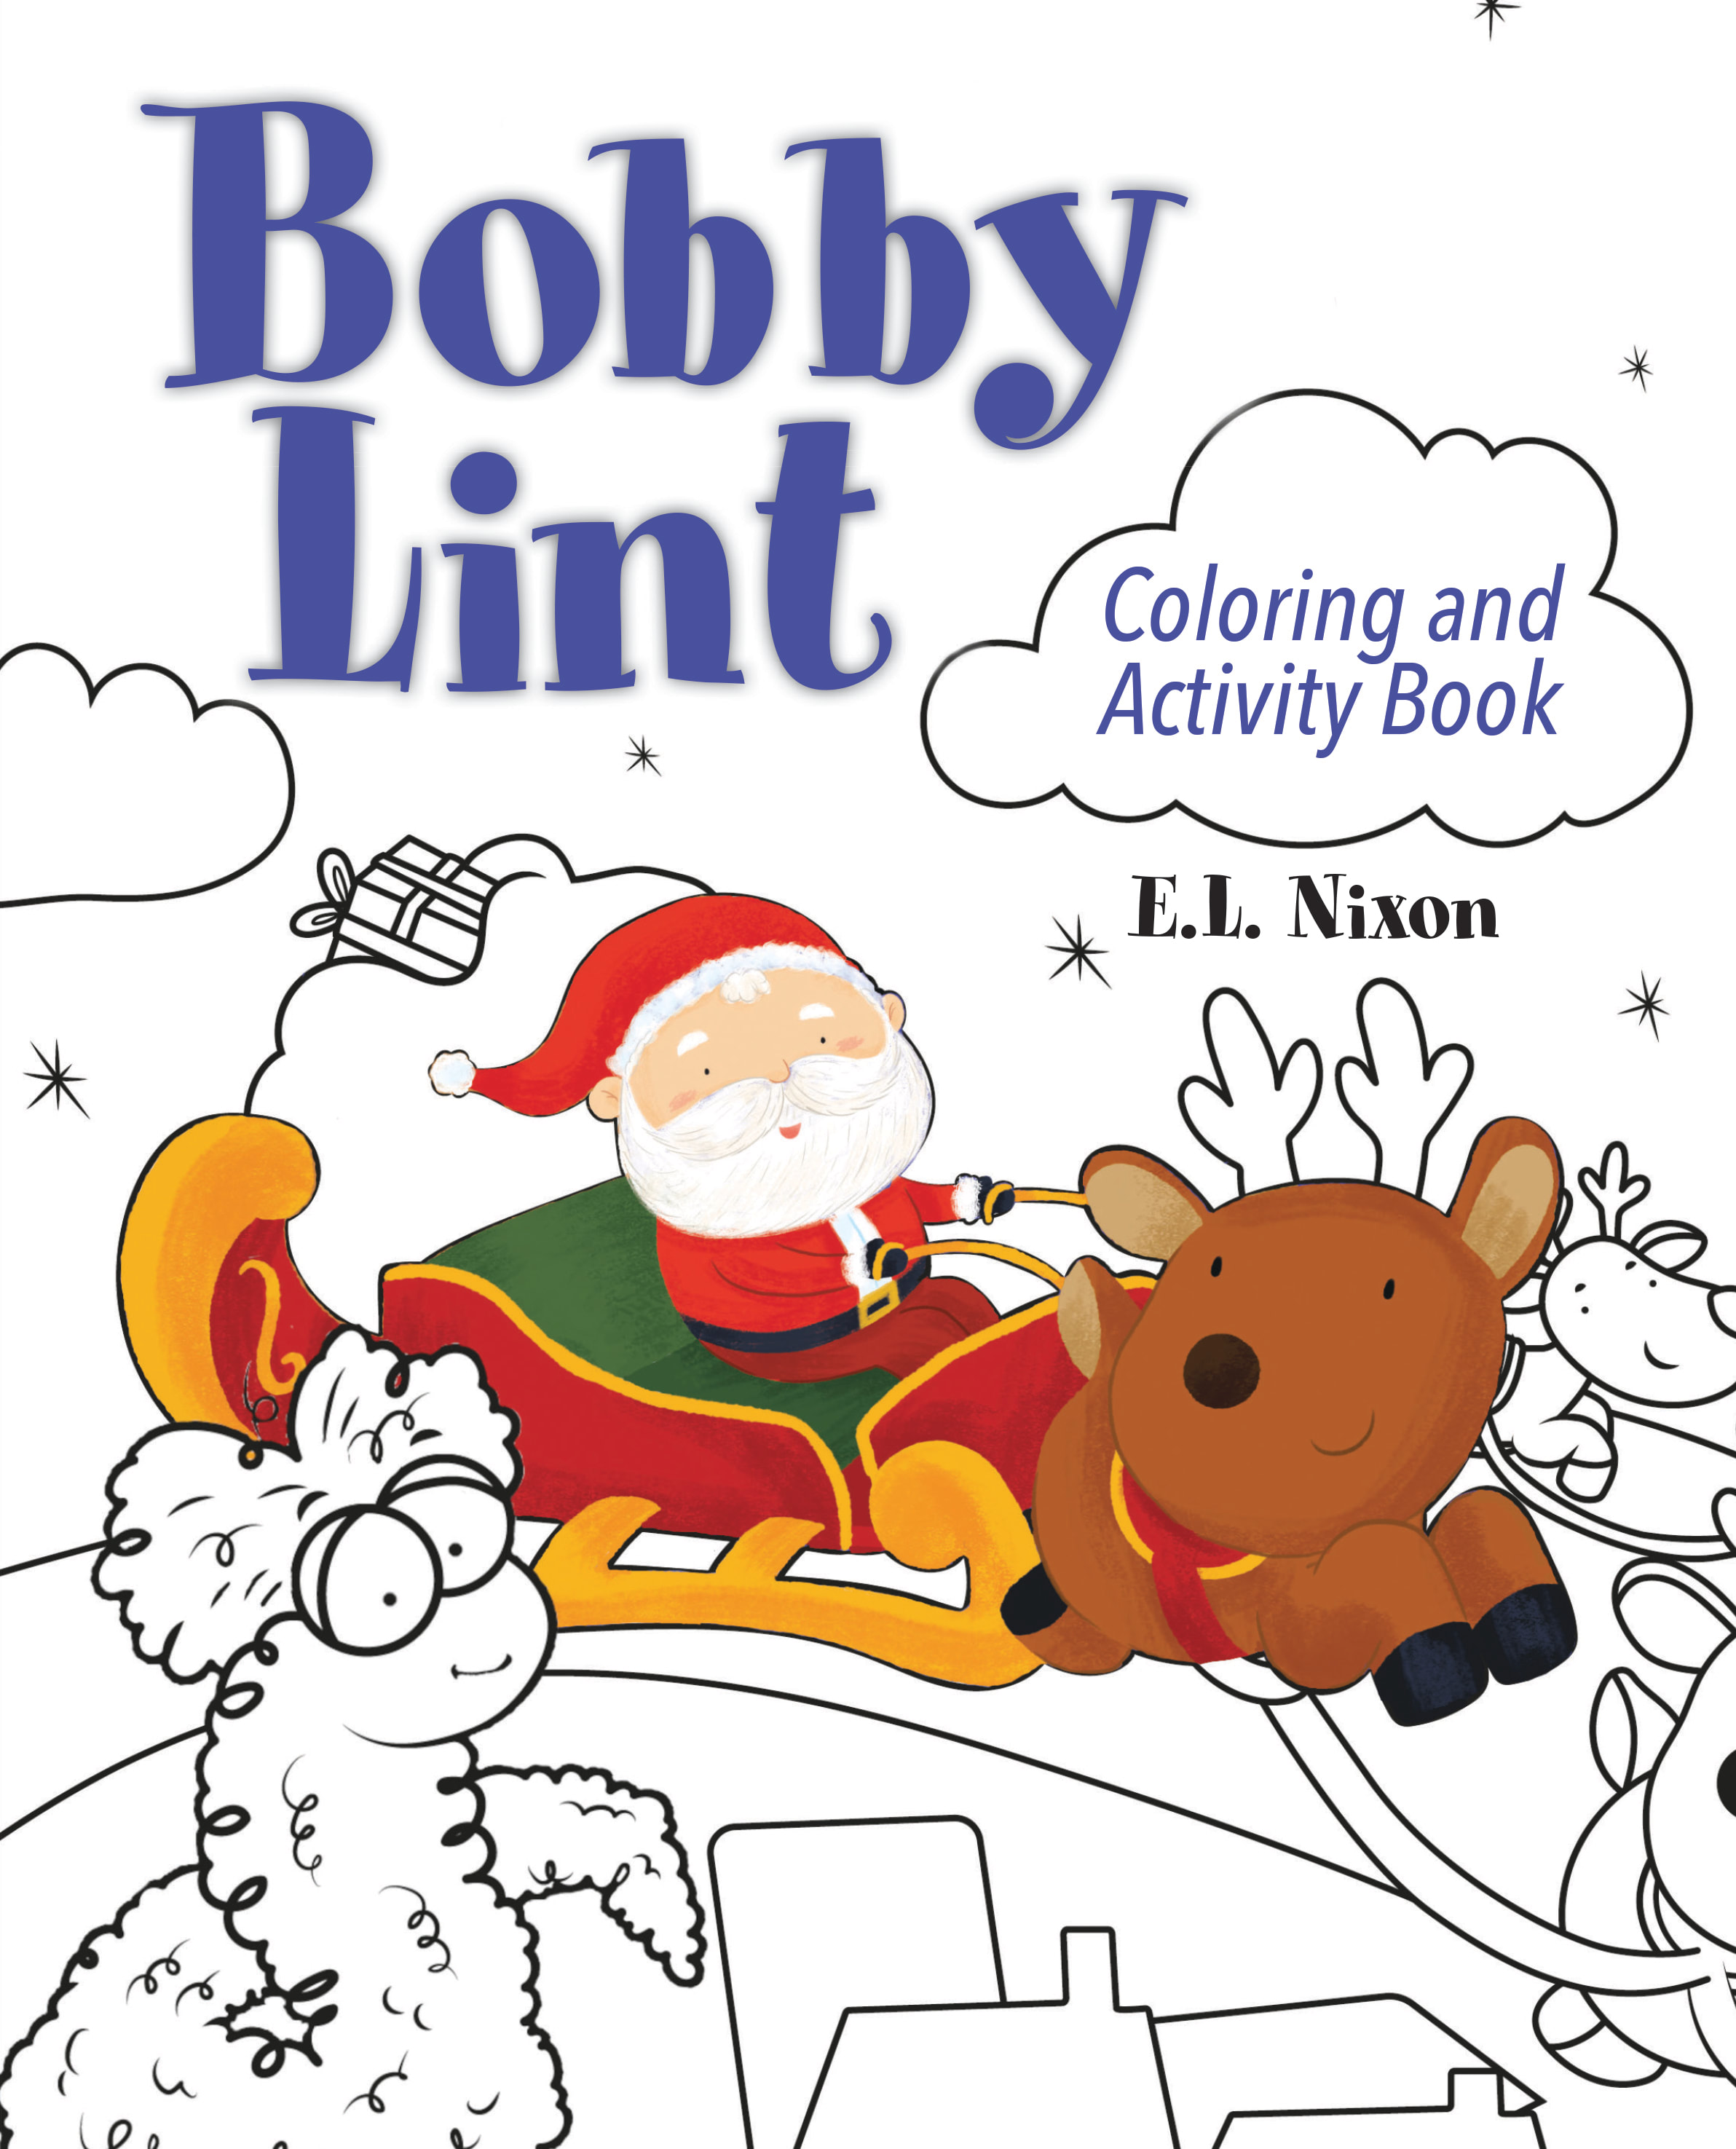 Bobby lint coloring and activity book soft cover by el nixon